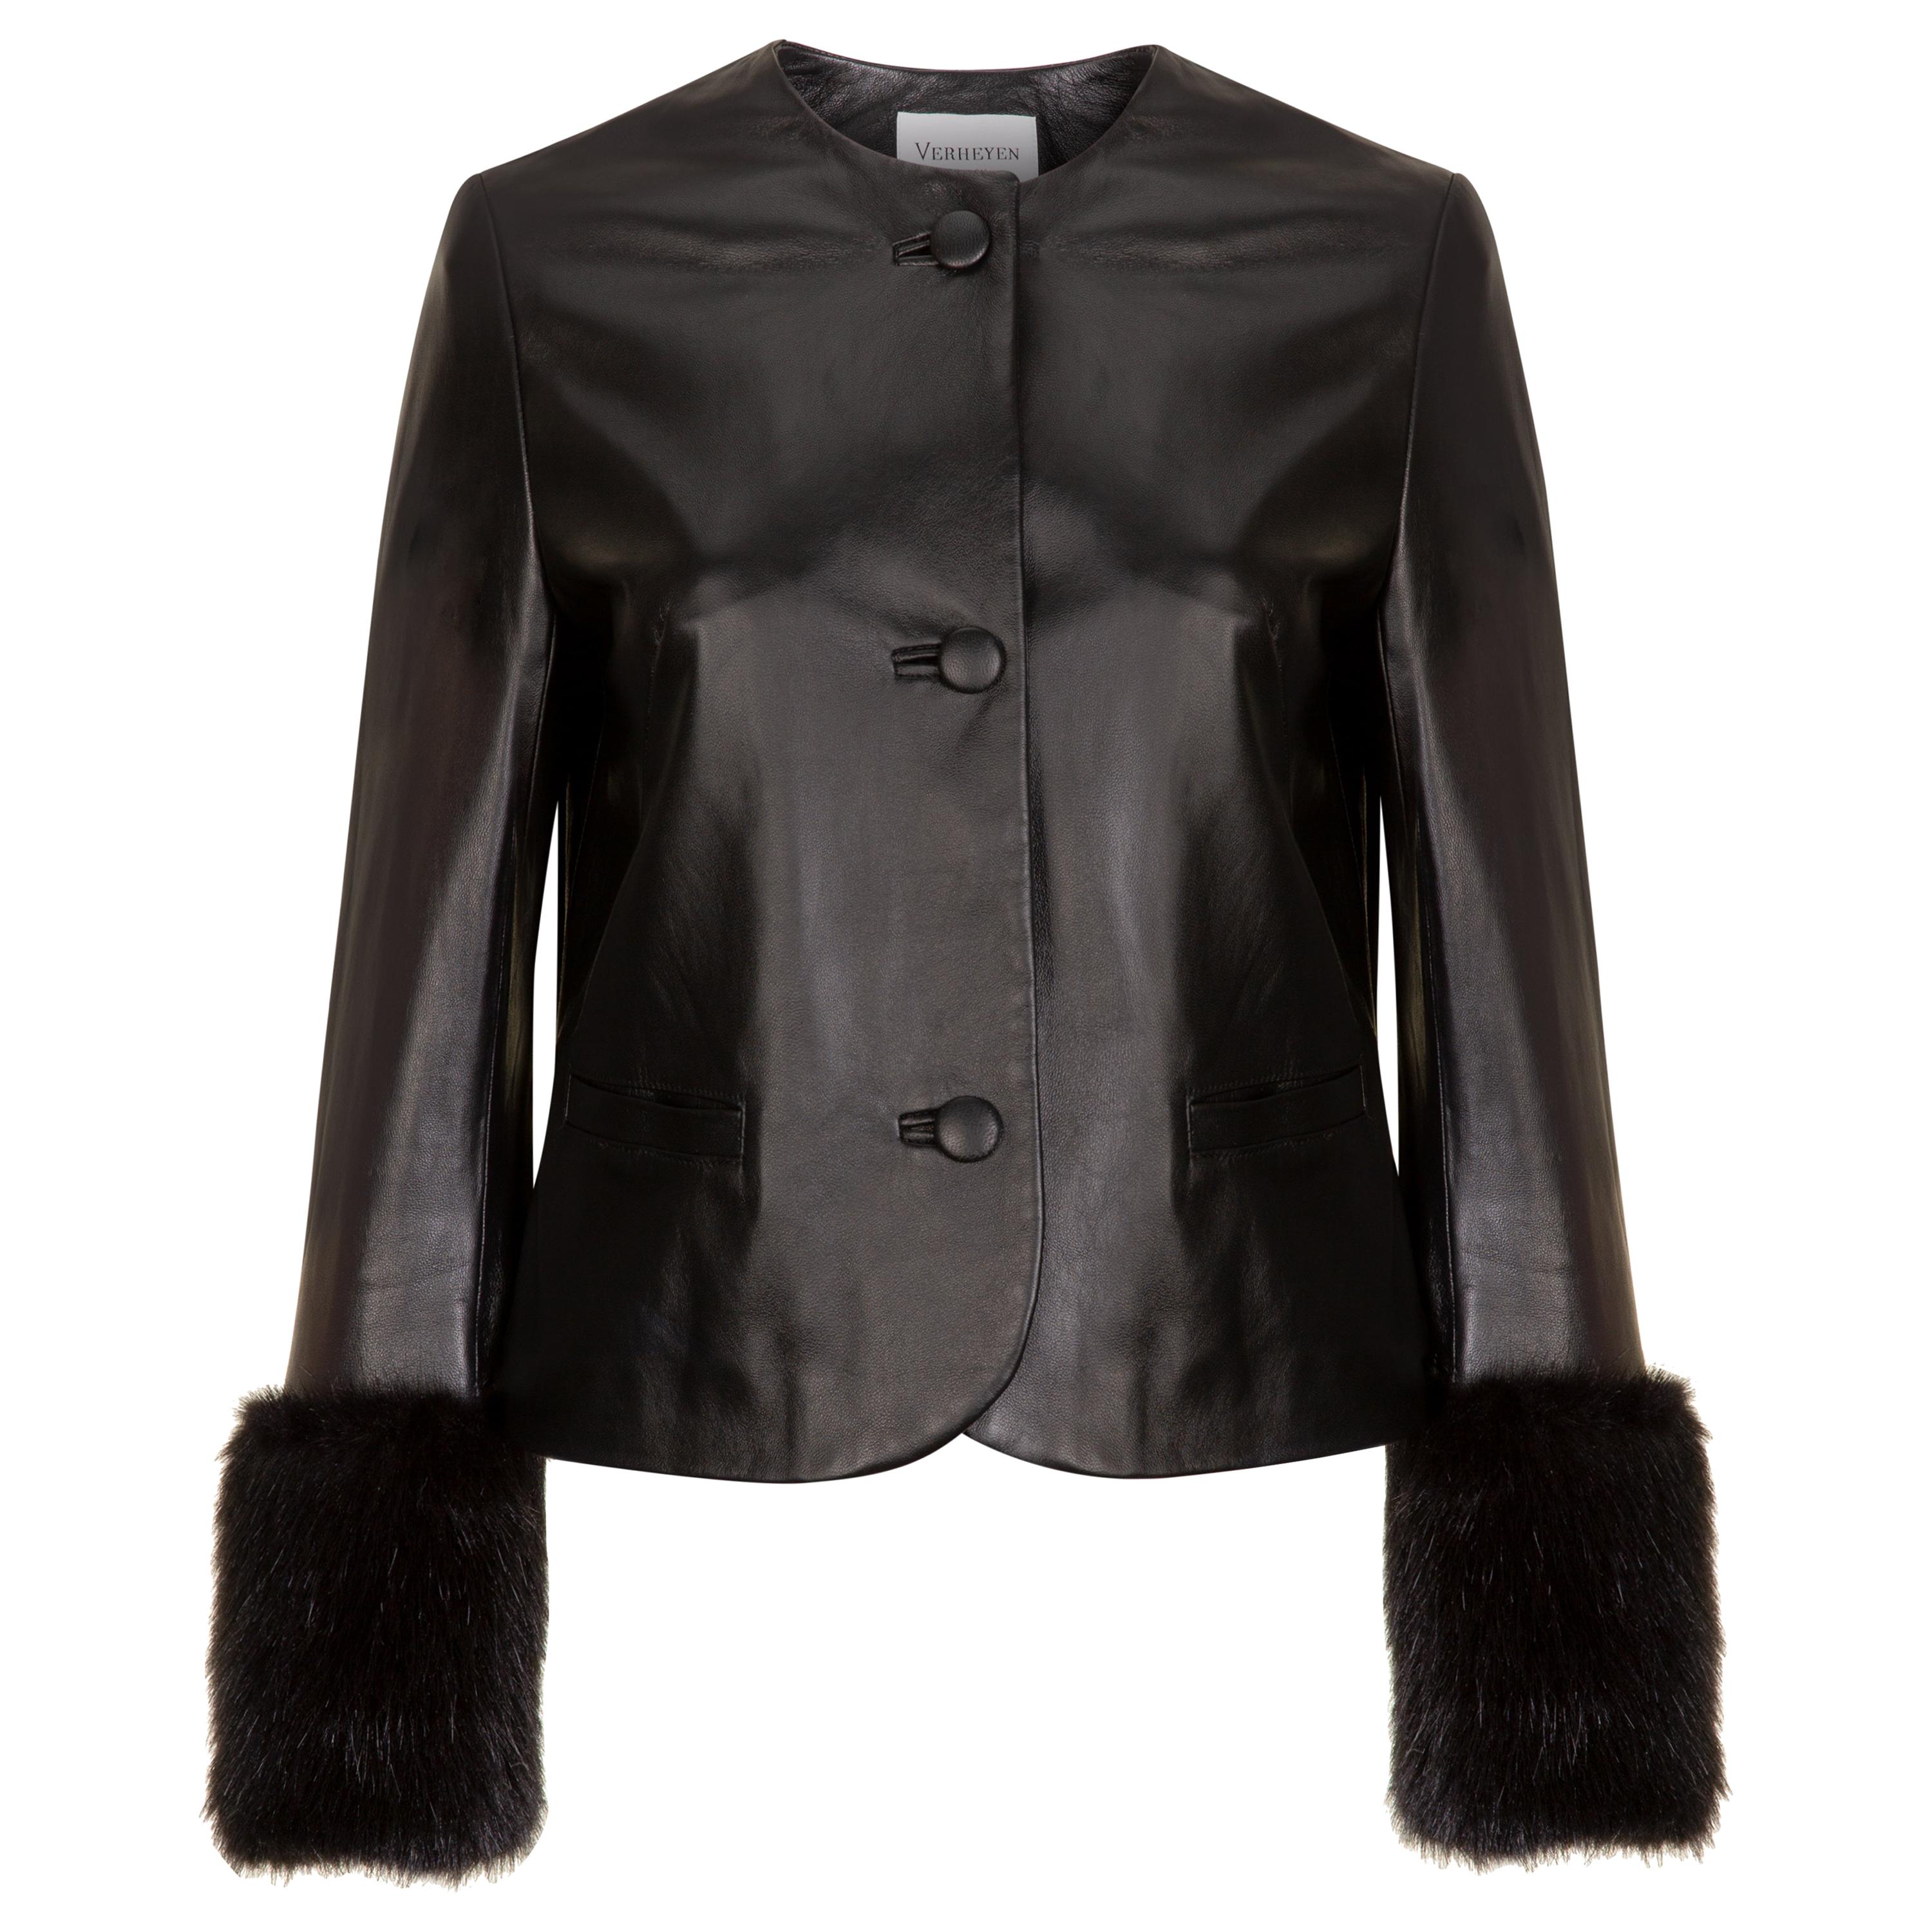 Verheyen Vita Cropped Jacket in Black Leather with Faux Fur - Size uk 6 For Sale